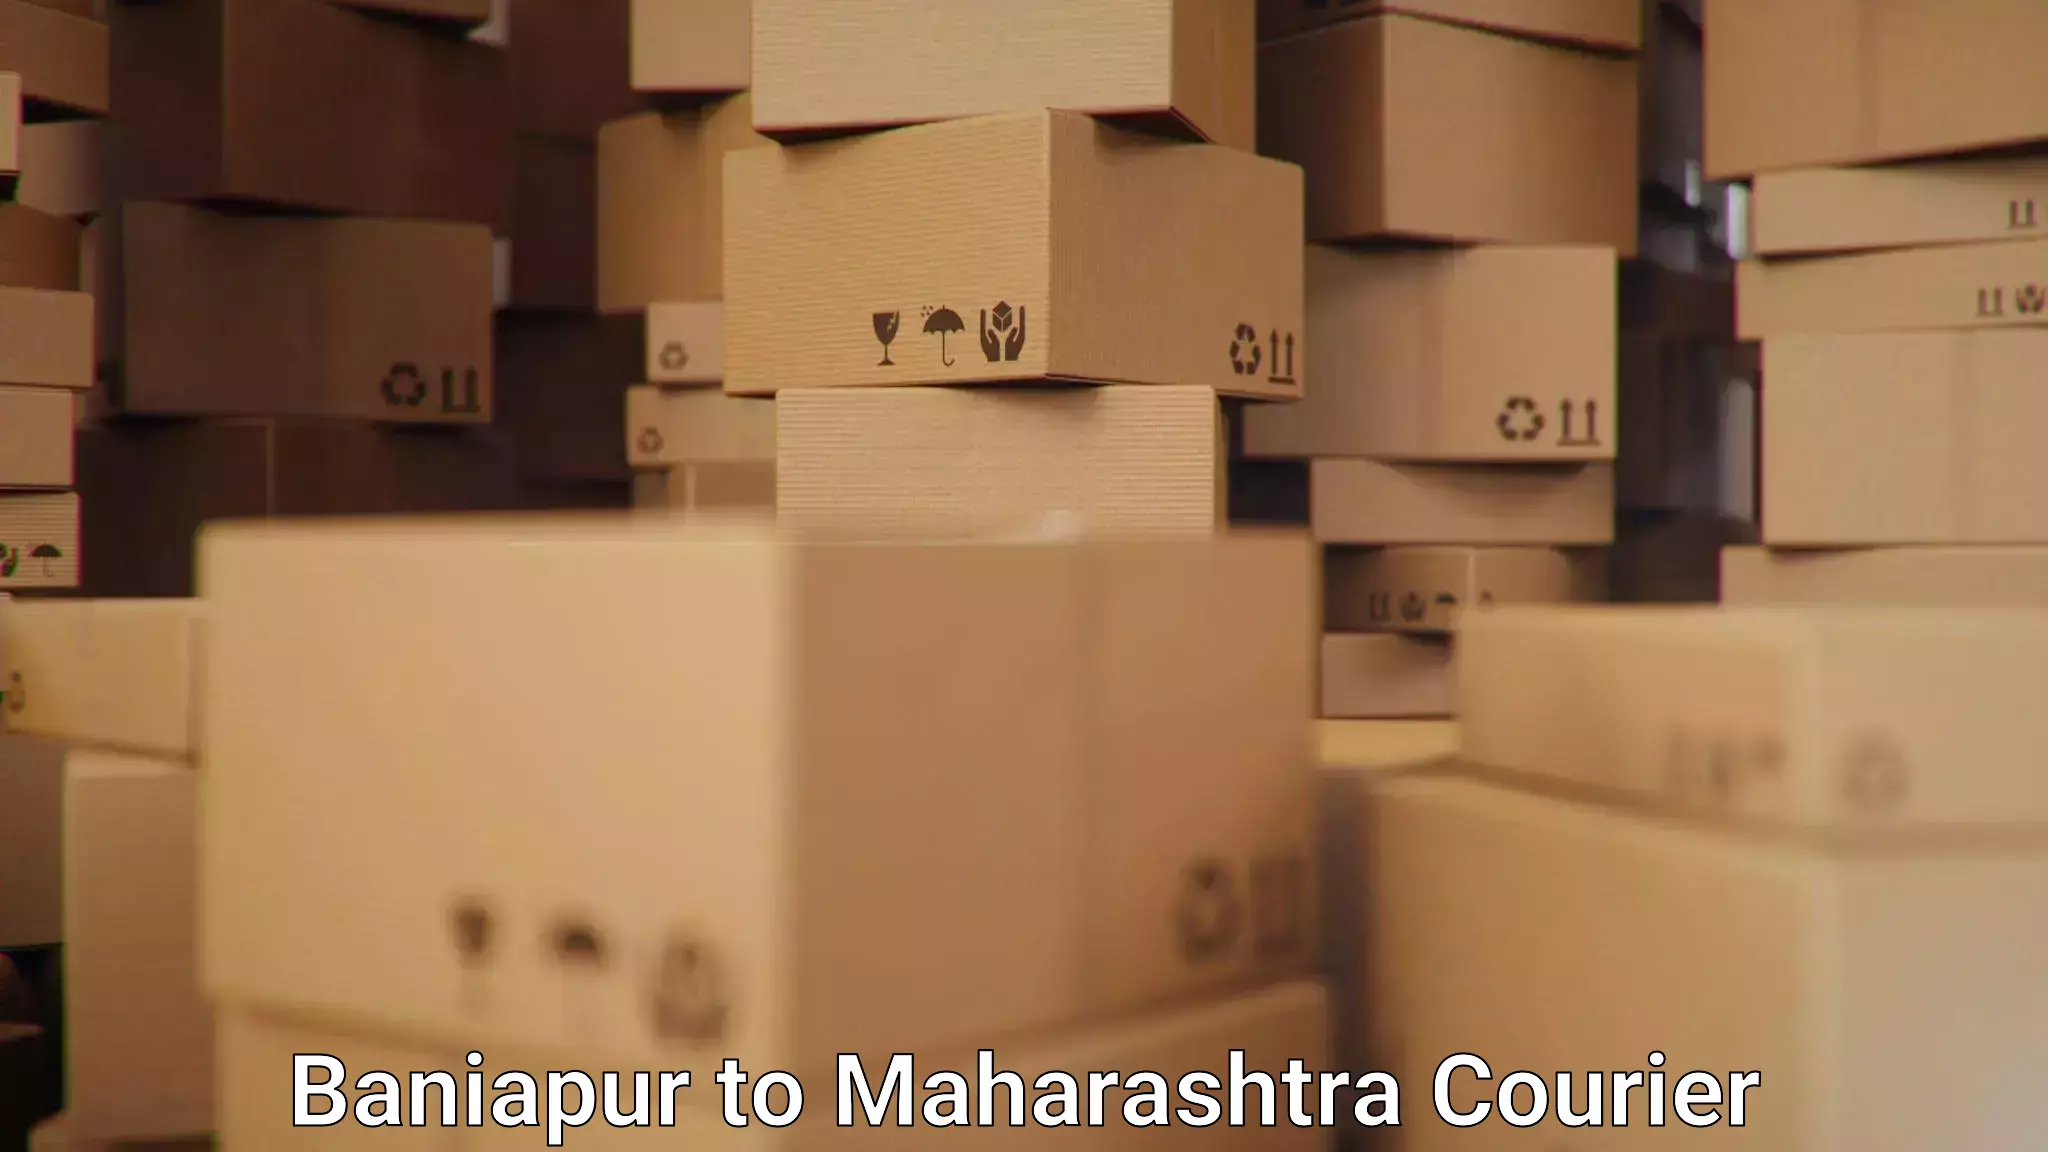 Custom courier packaging Baniapur to Alephata